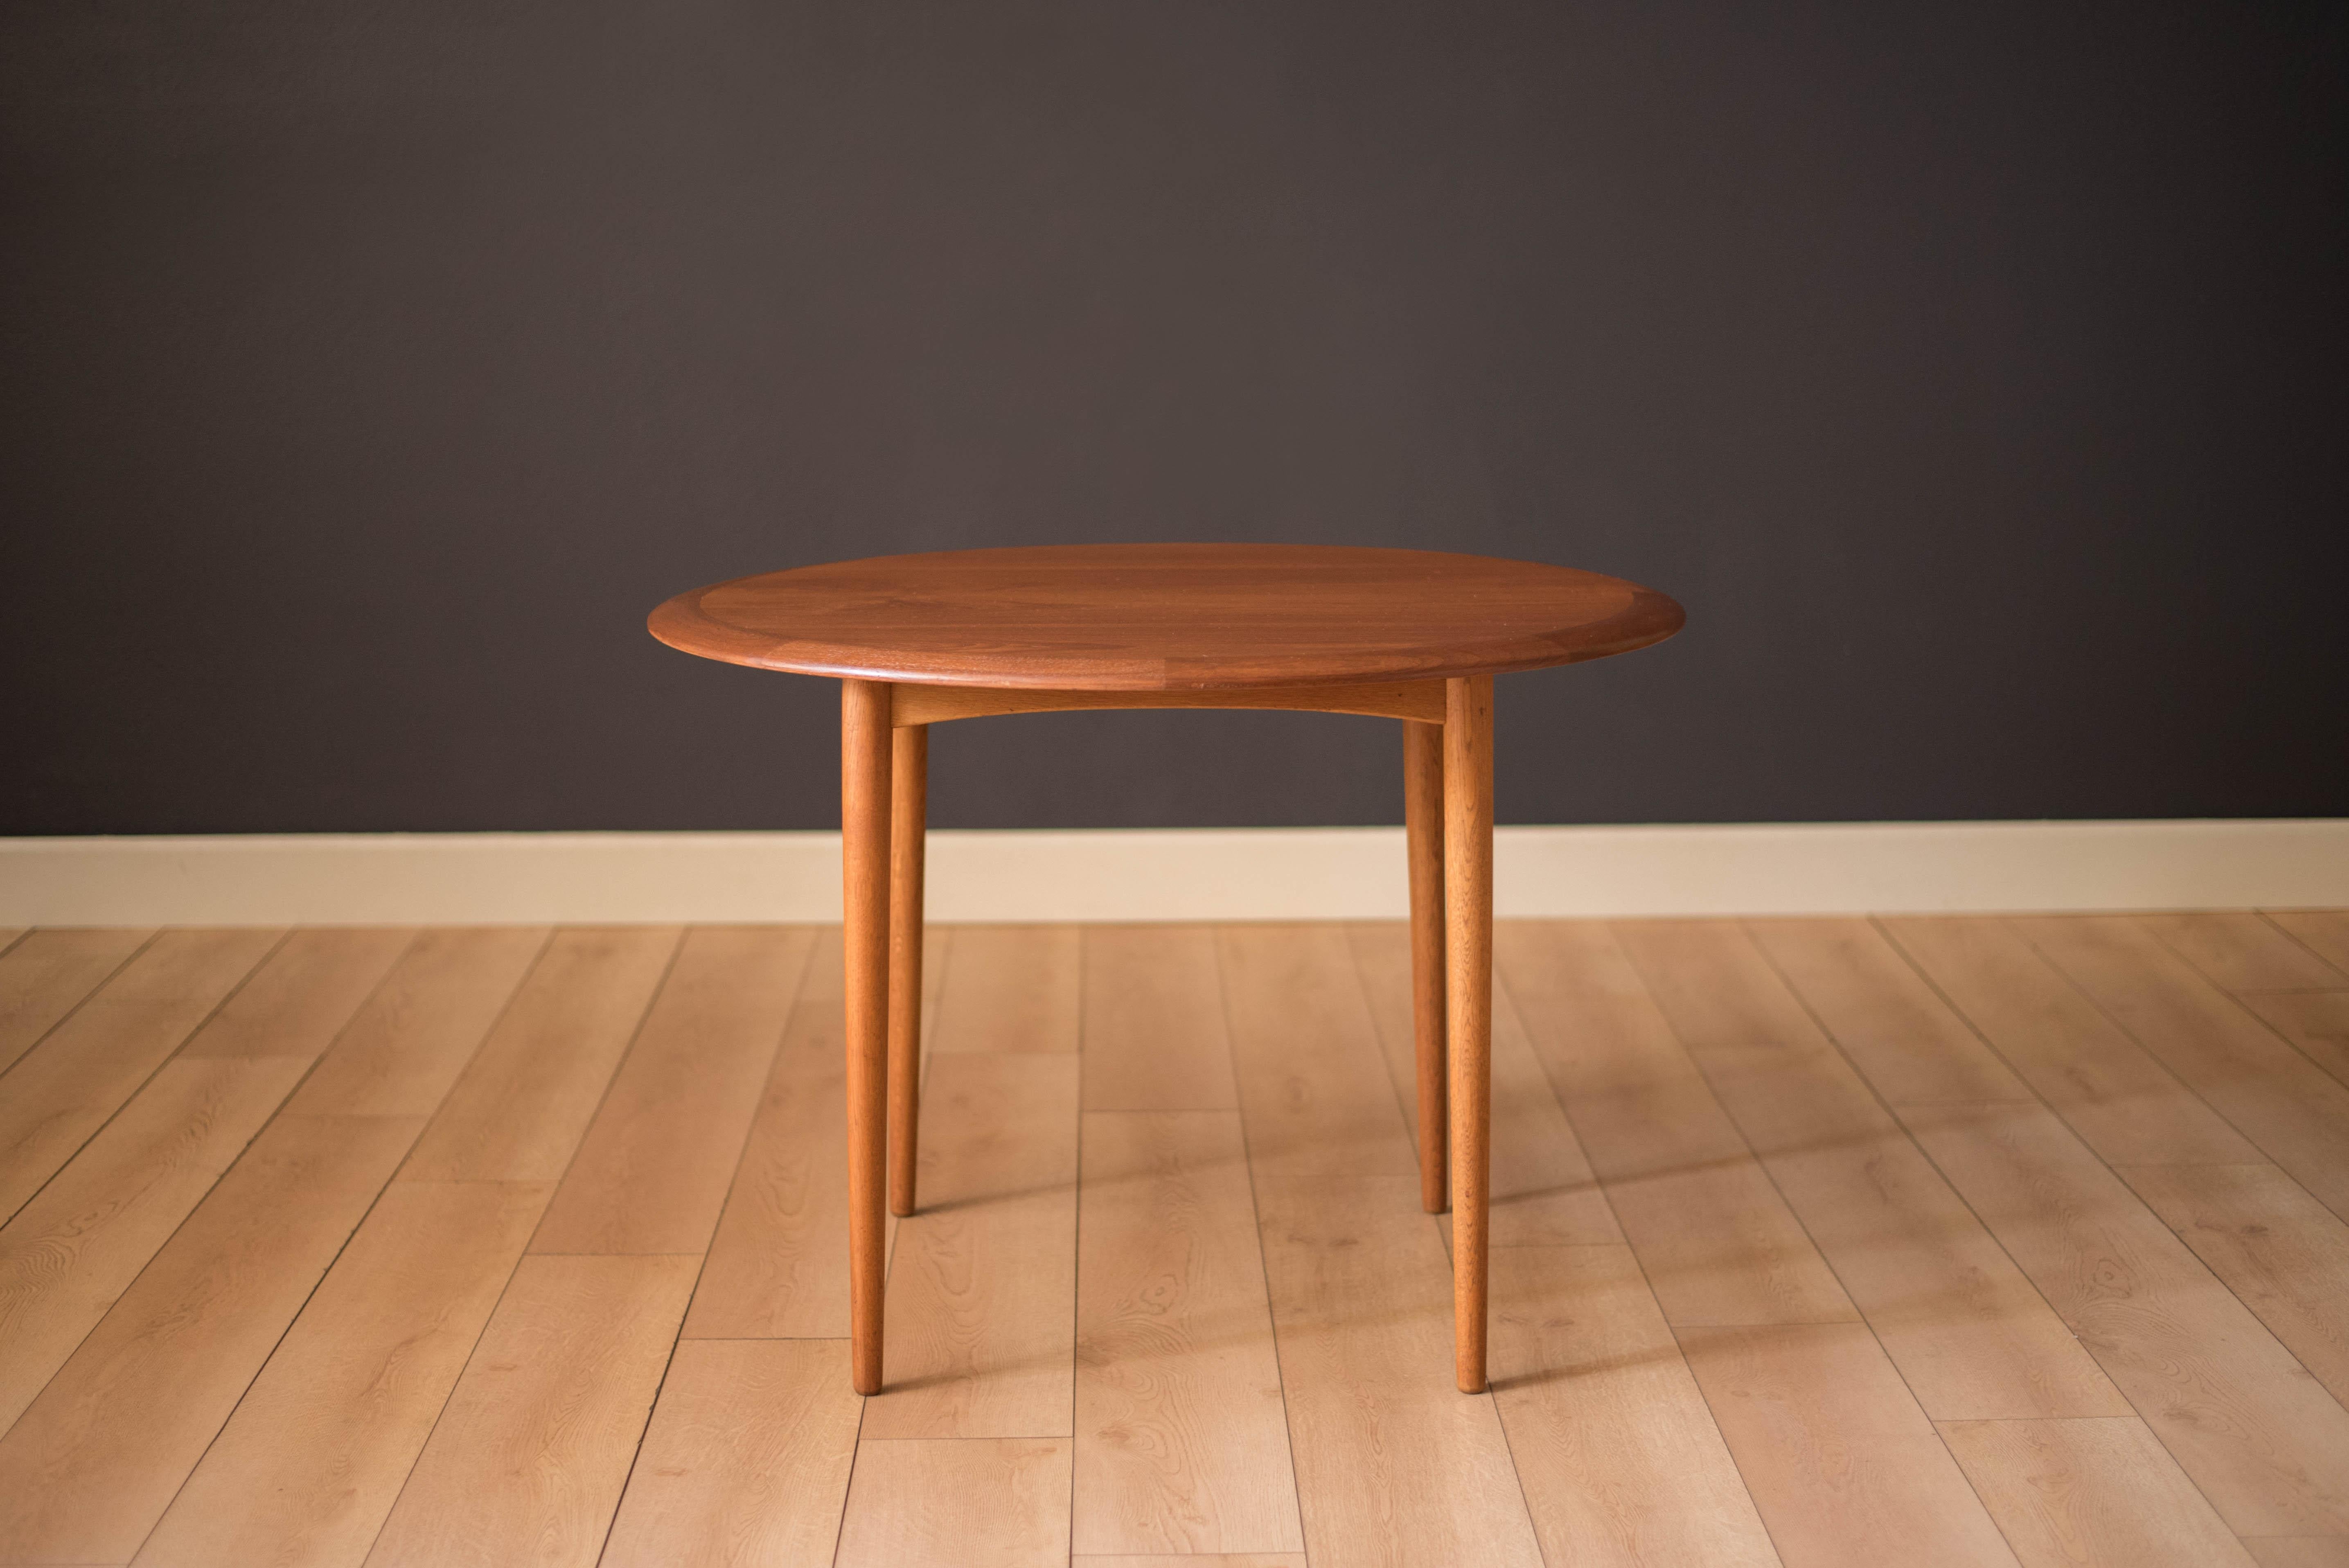 Mid-Century Modern round dining table in teak, circa 1960s, Denmark. This simple design seats up to four people and is perfect to use as a card game table. The tabletop features thick solid teak edge banding and is supported by contrasting oak